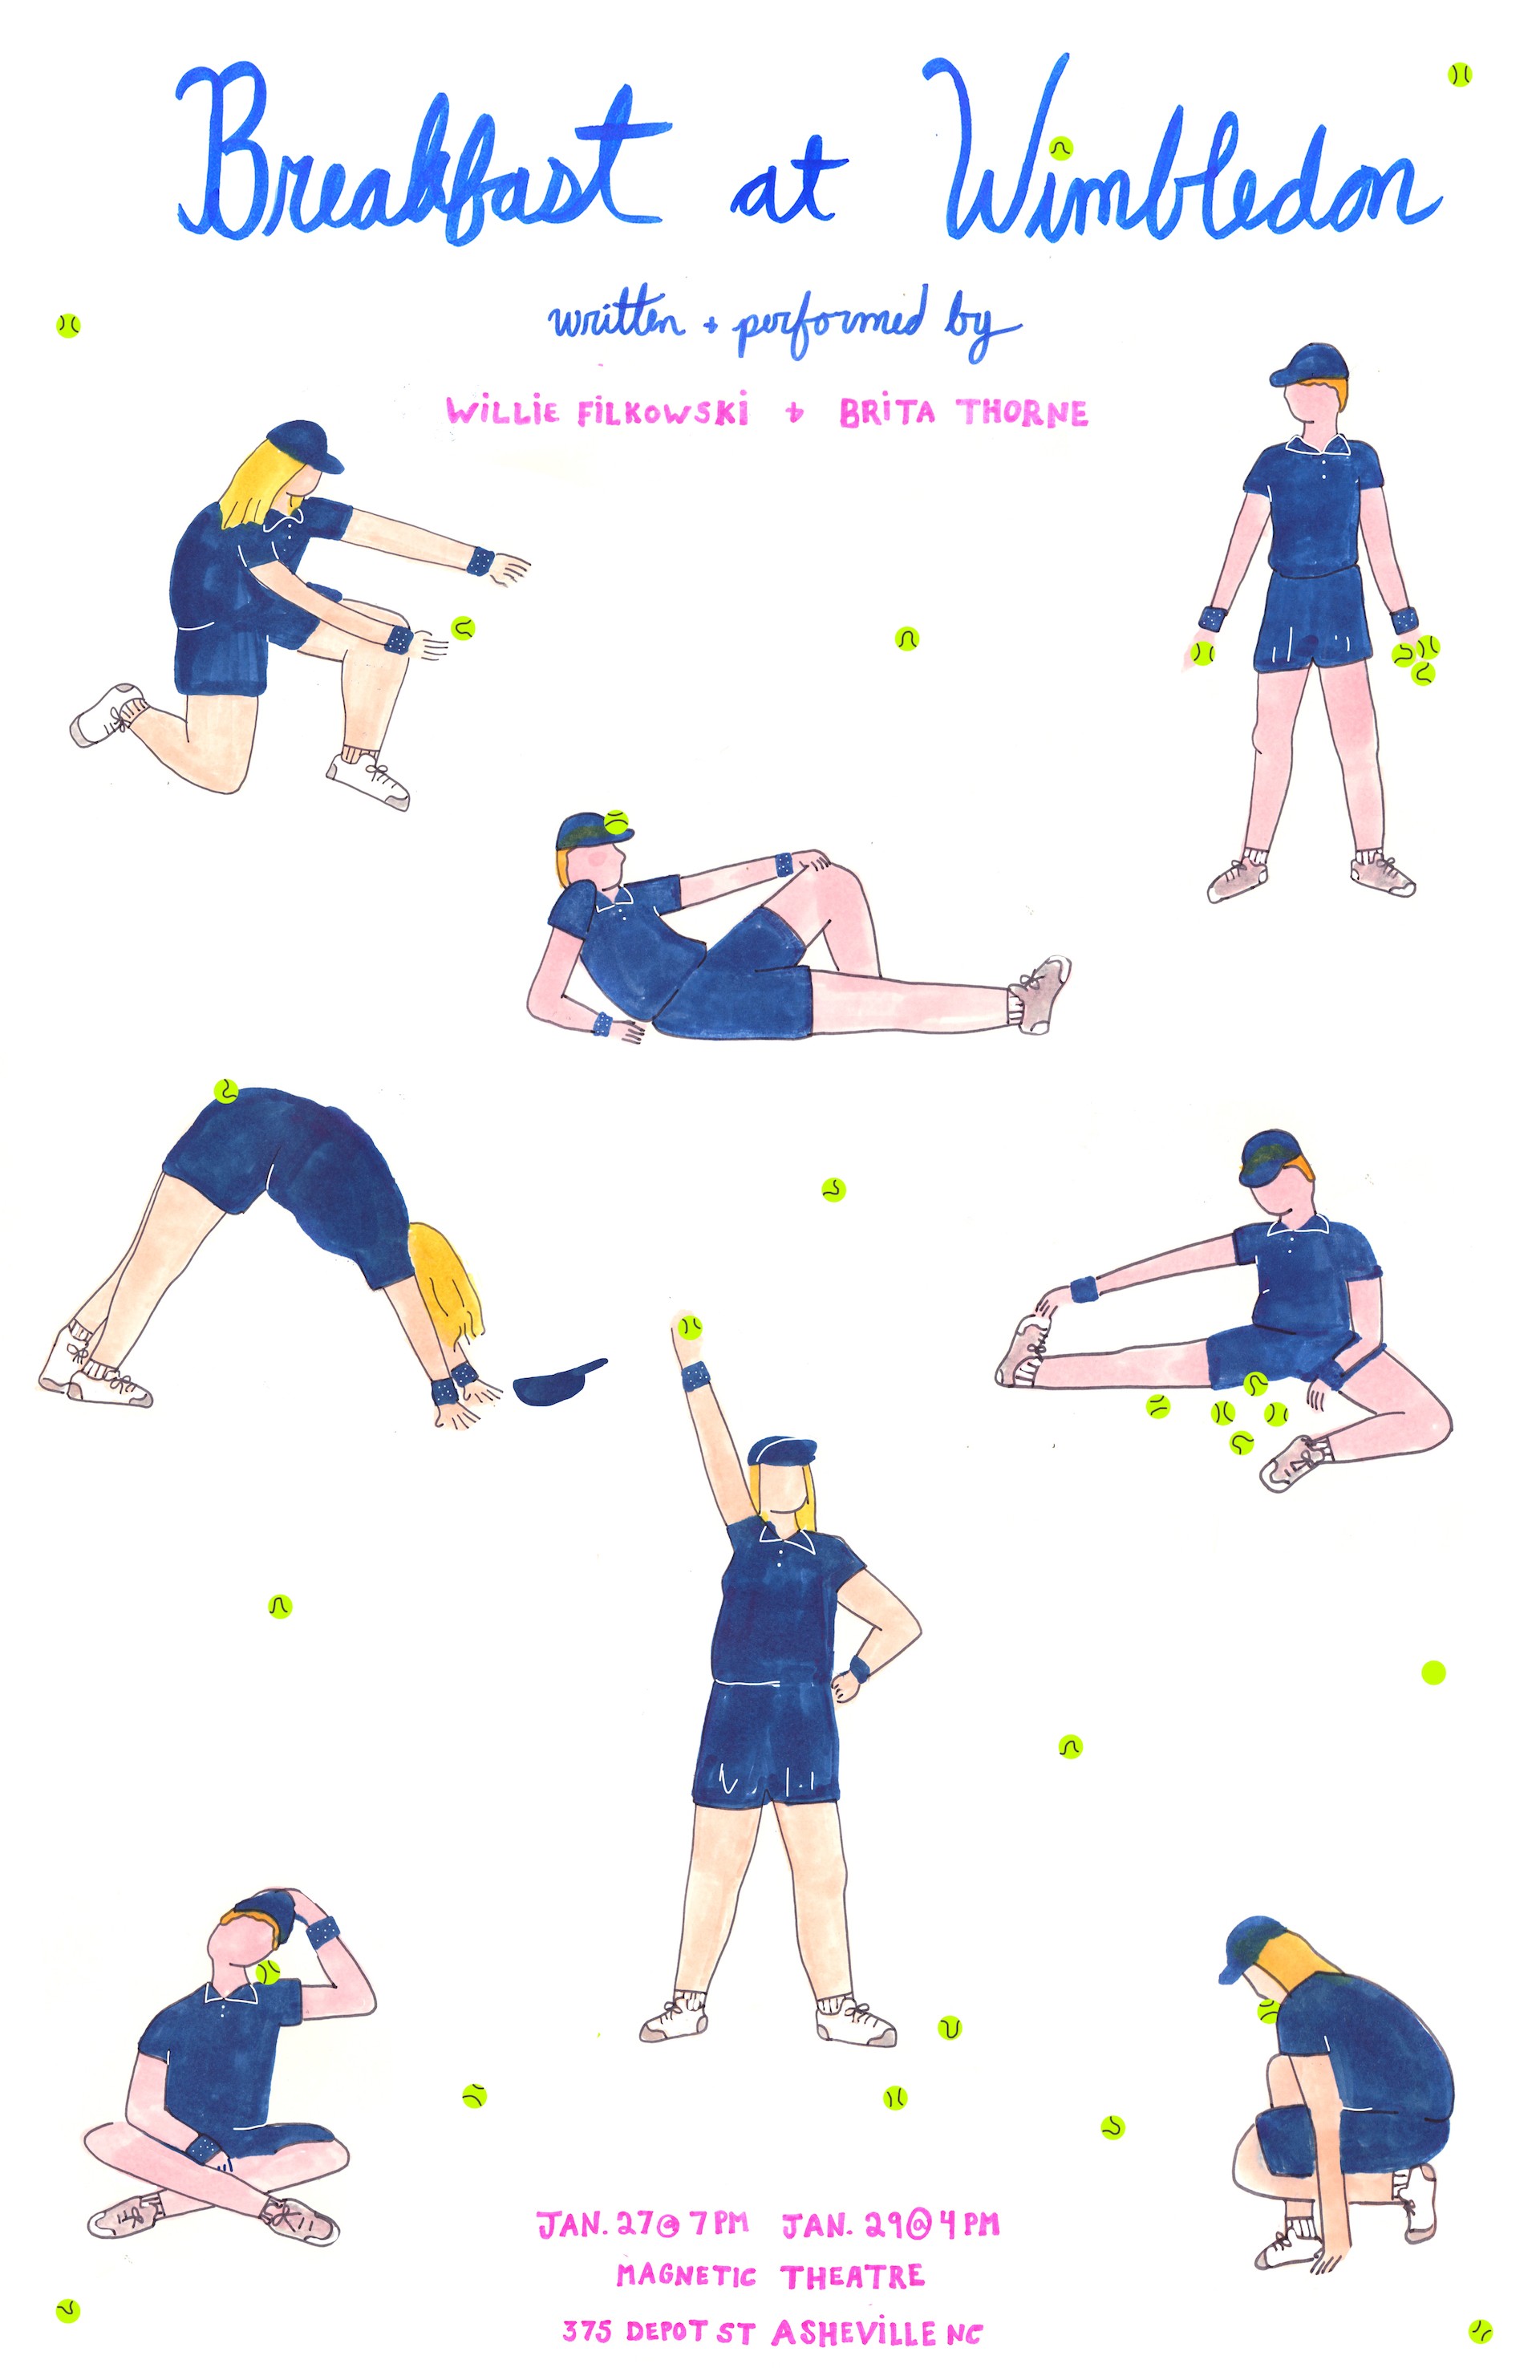 Handwritten blue text on top of design that reads, "Breakfast at Wimbledon" More text at bottom that provide details around showtimes. Images of two characters wearing blue uniforms in various stretching/tennis positions with tennis balls. 